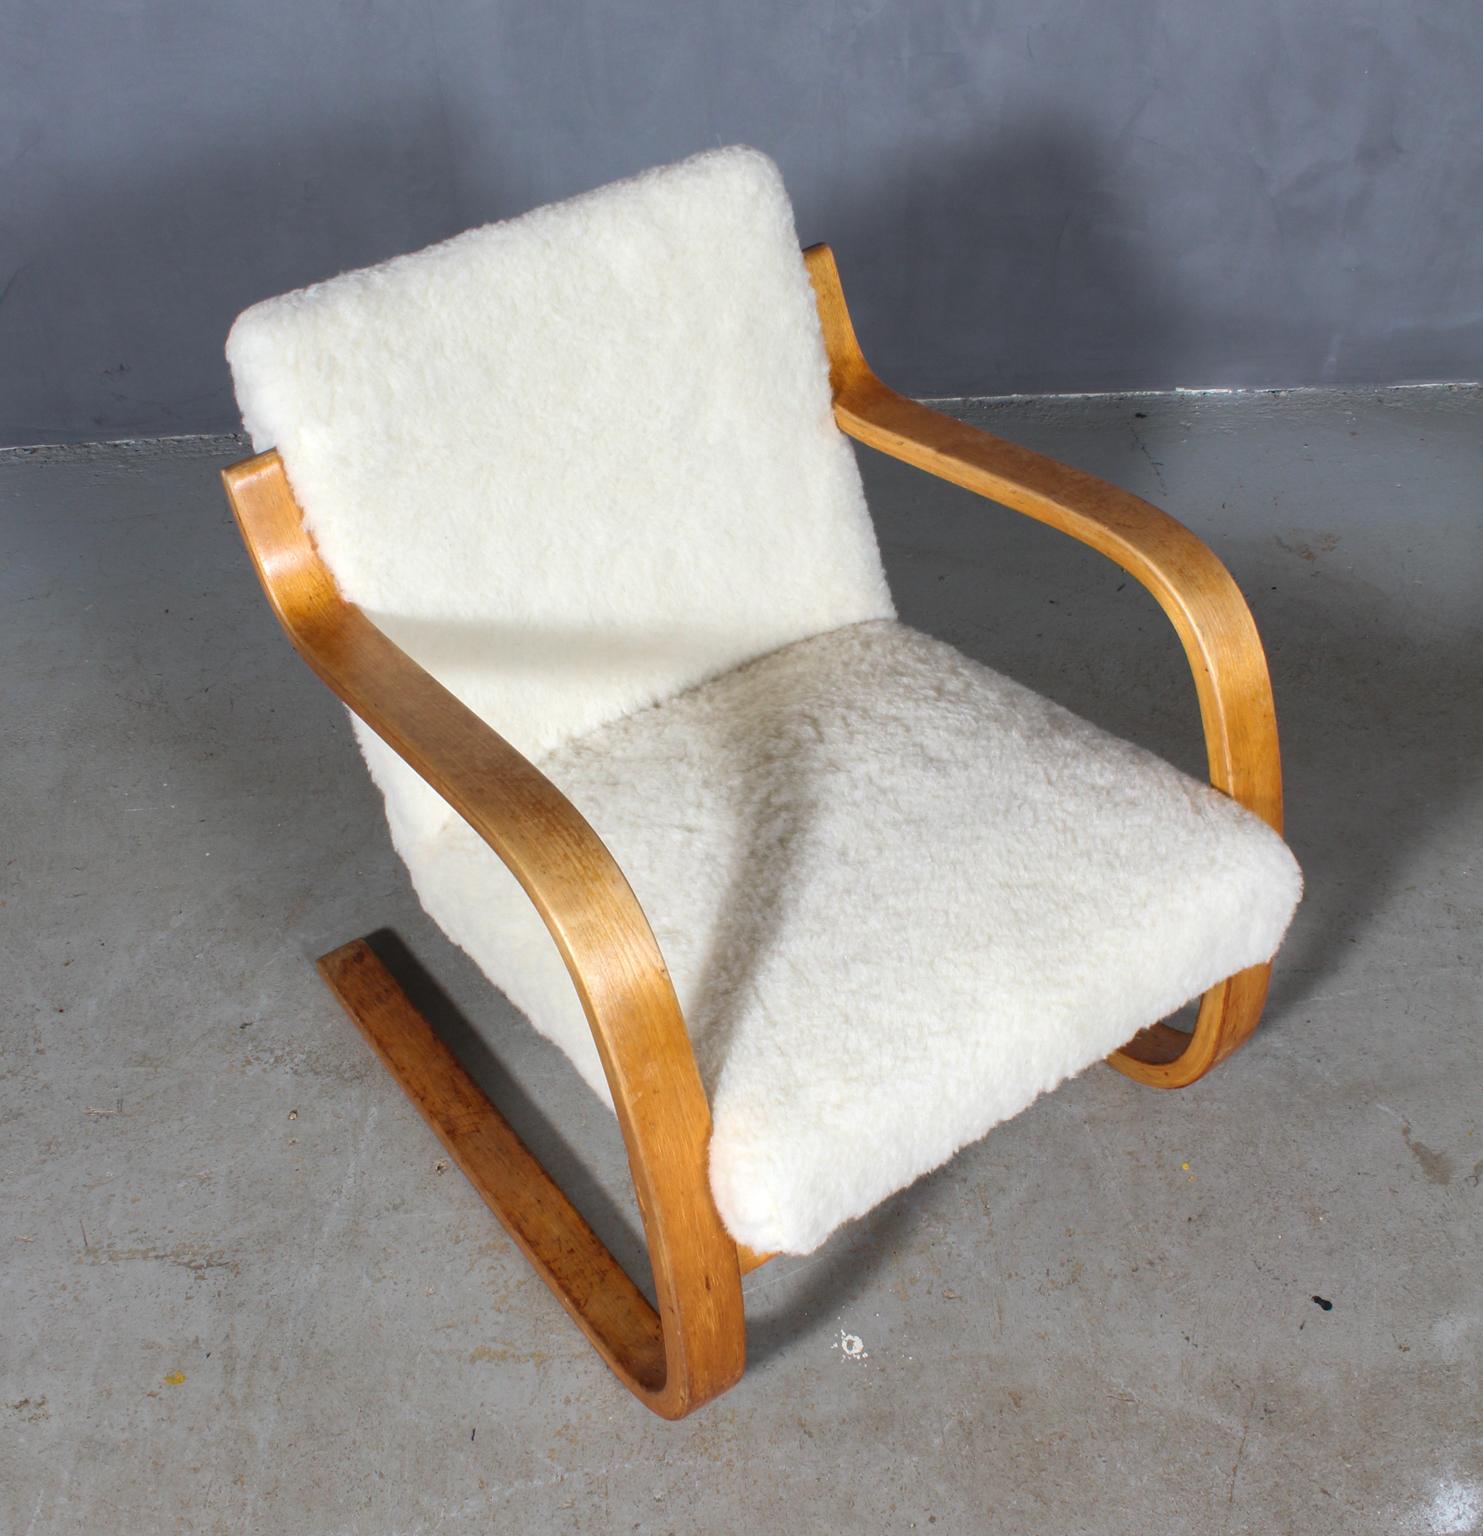 Lounge chair designed by Alvar Aalto manufactured, circa 1960.

New upholstered with sheepwool

Curved birch plywood and braided vegetable fiber. 
Measures: 74 x 61 x 69 cm.
 